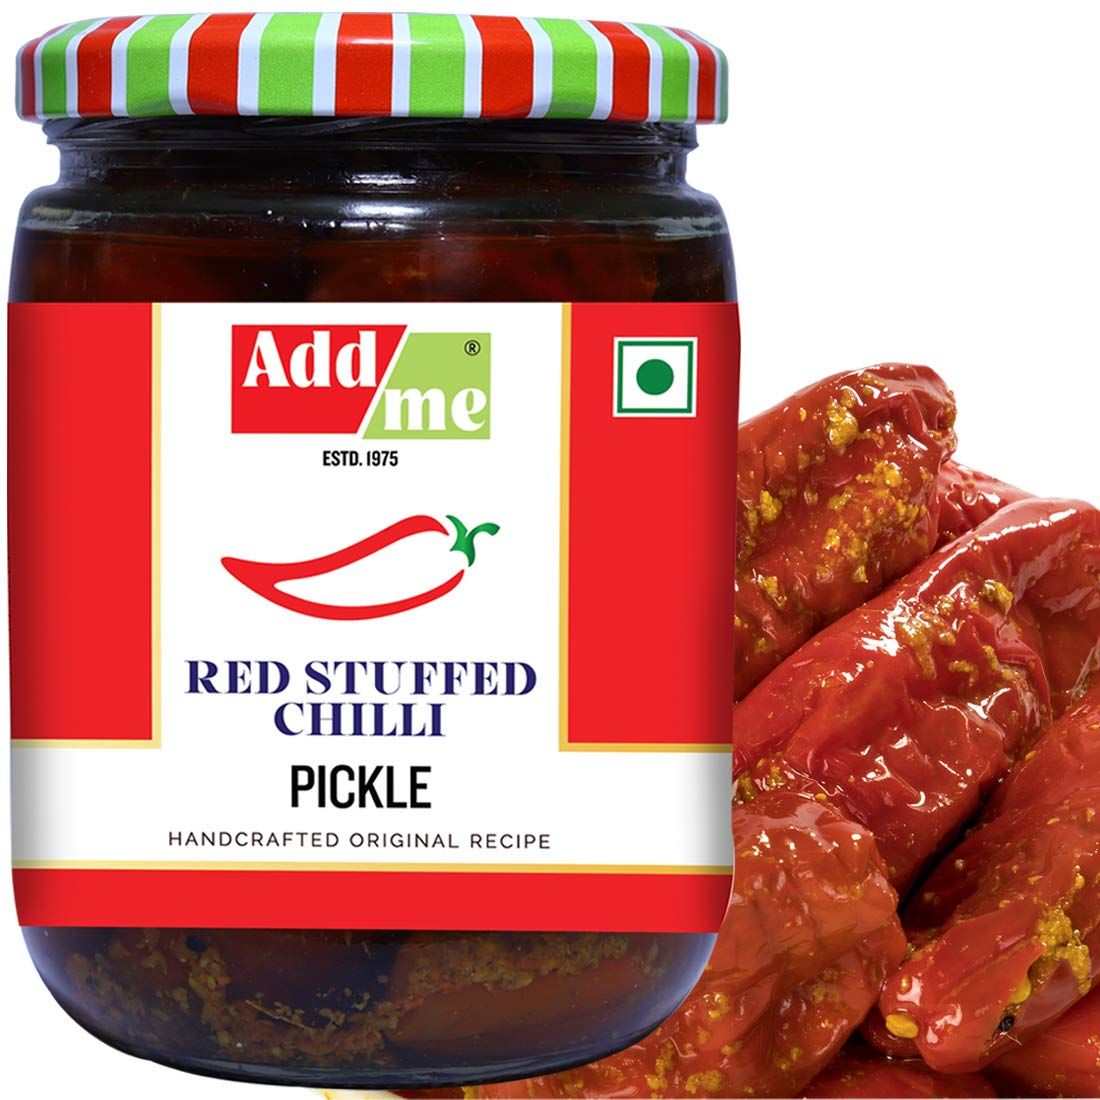 Add Me Red Stuffed Chilli Pickle Image